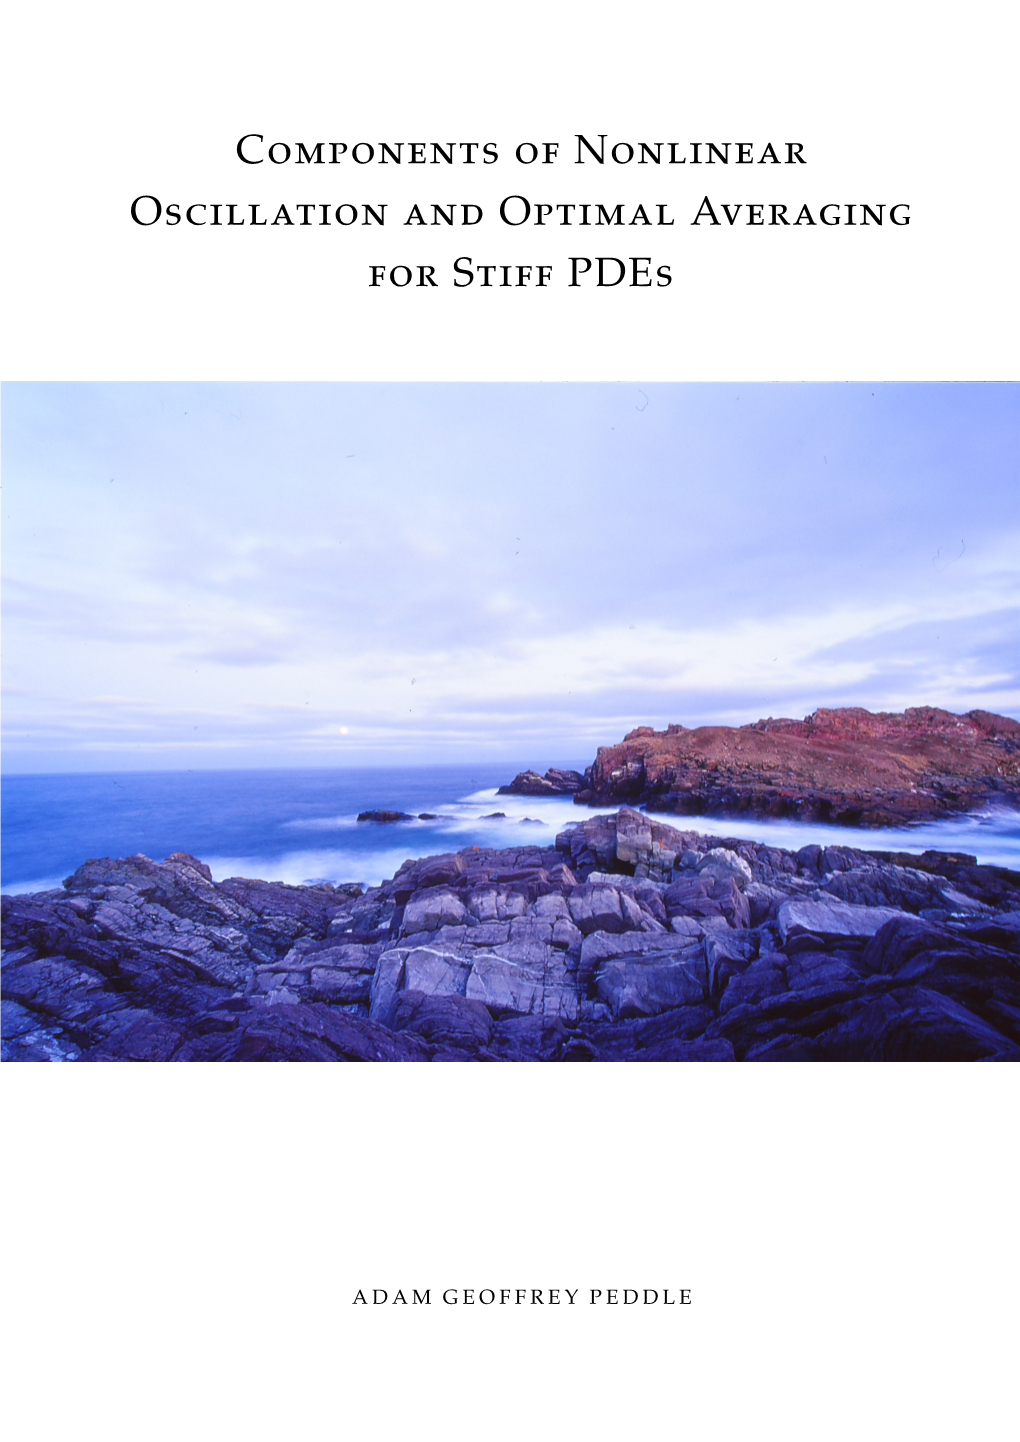 Components of Nonlinear Oscillation and Optimal Averaging for Stiff Pdes